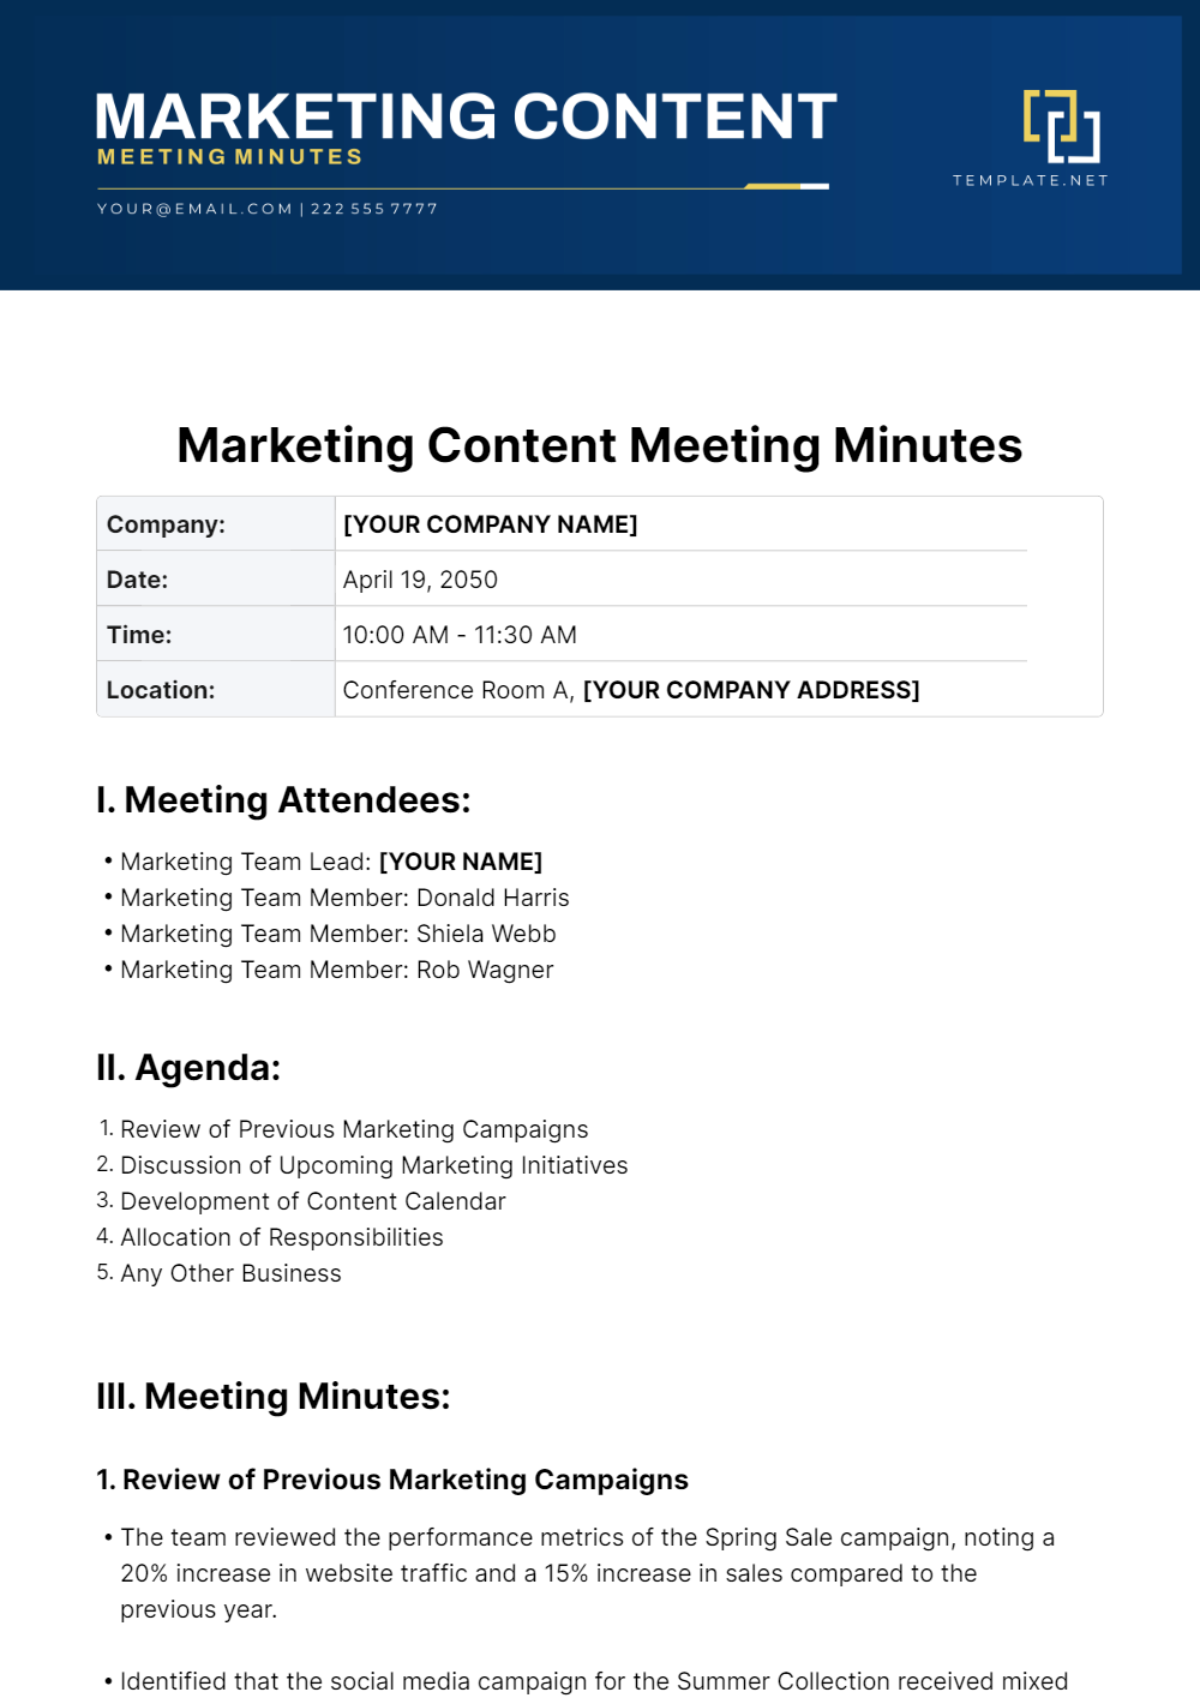 Marketing Content Meeting Minutes Template